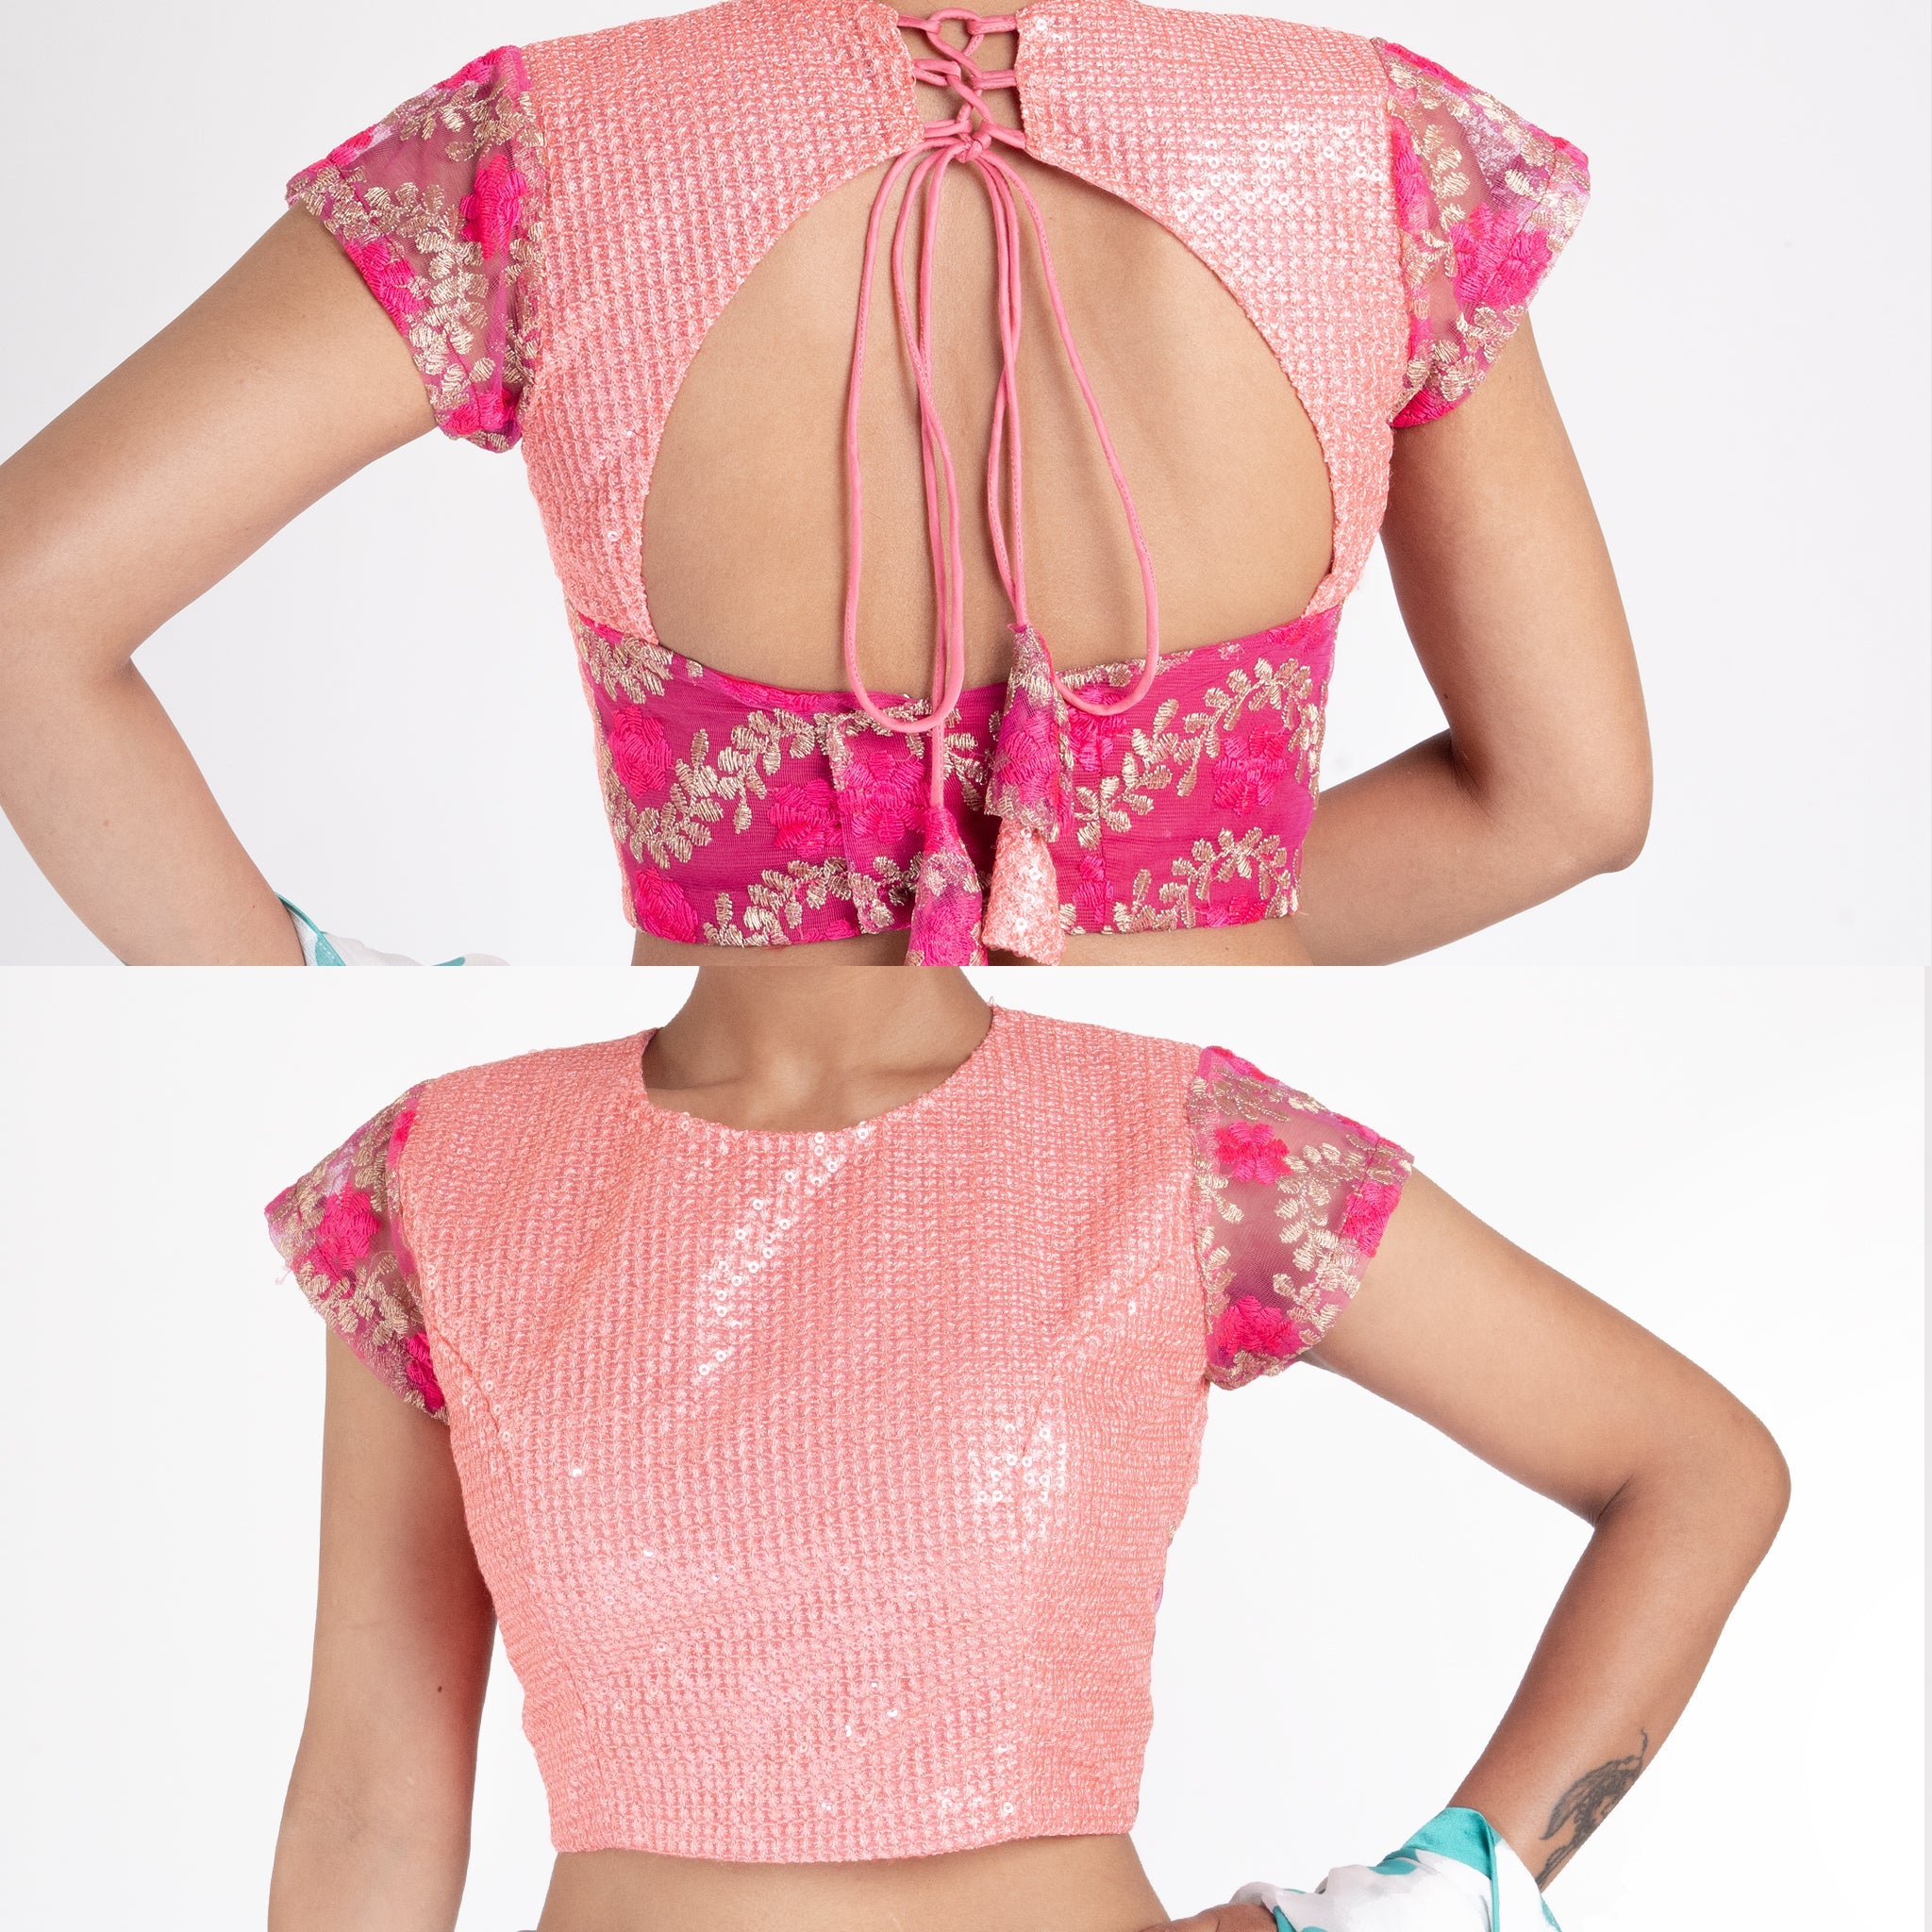 Women's Peach Sequin Net Padded Blouse With Pink Floral Net Detailing - Boveee